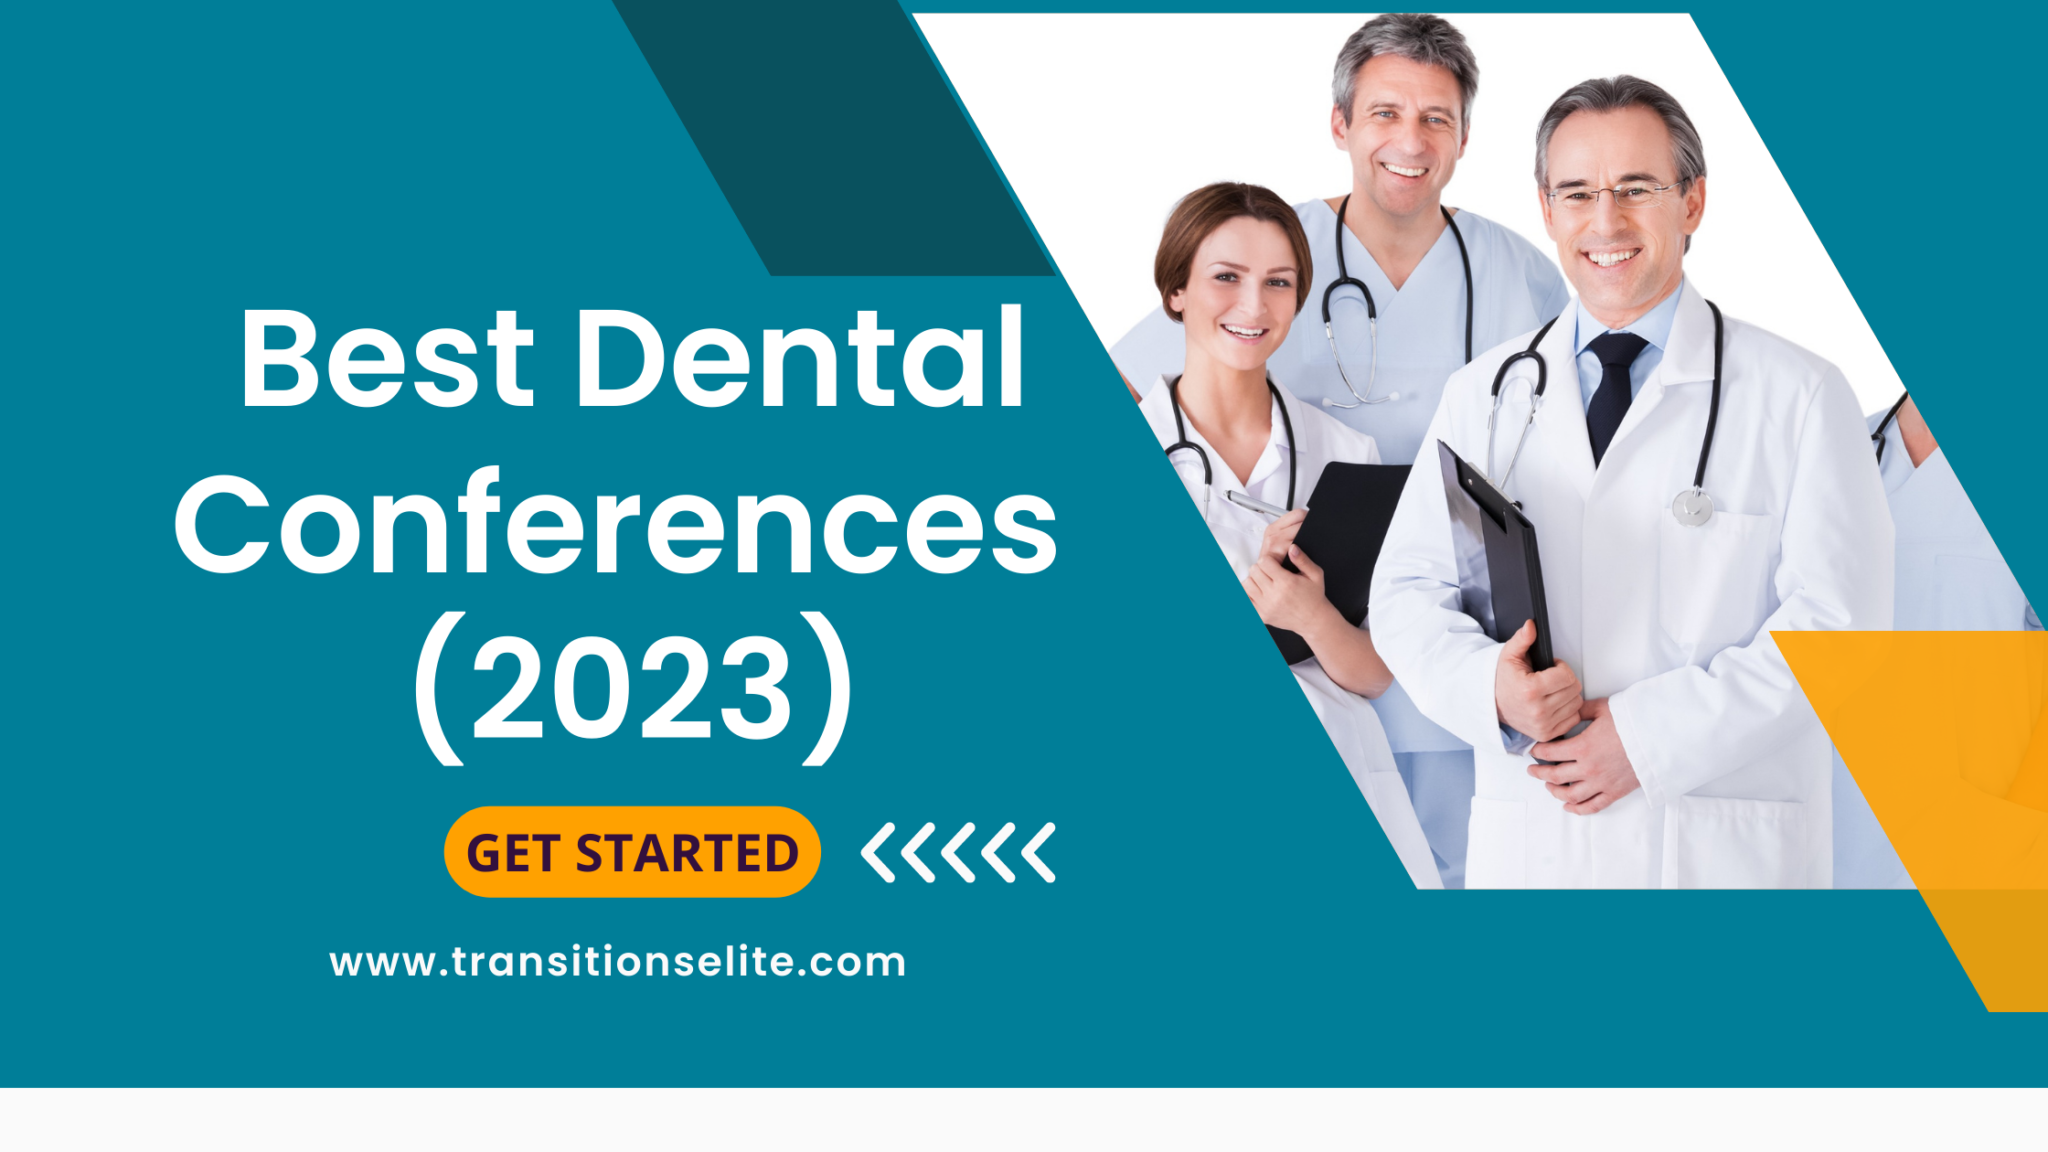 Best Dental Conferences in 2023/2024 (New)